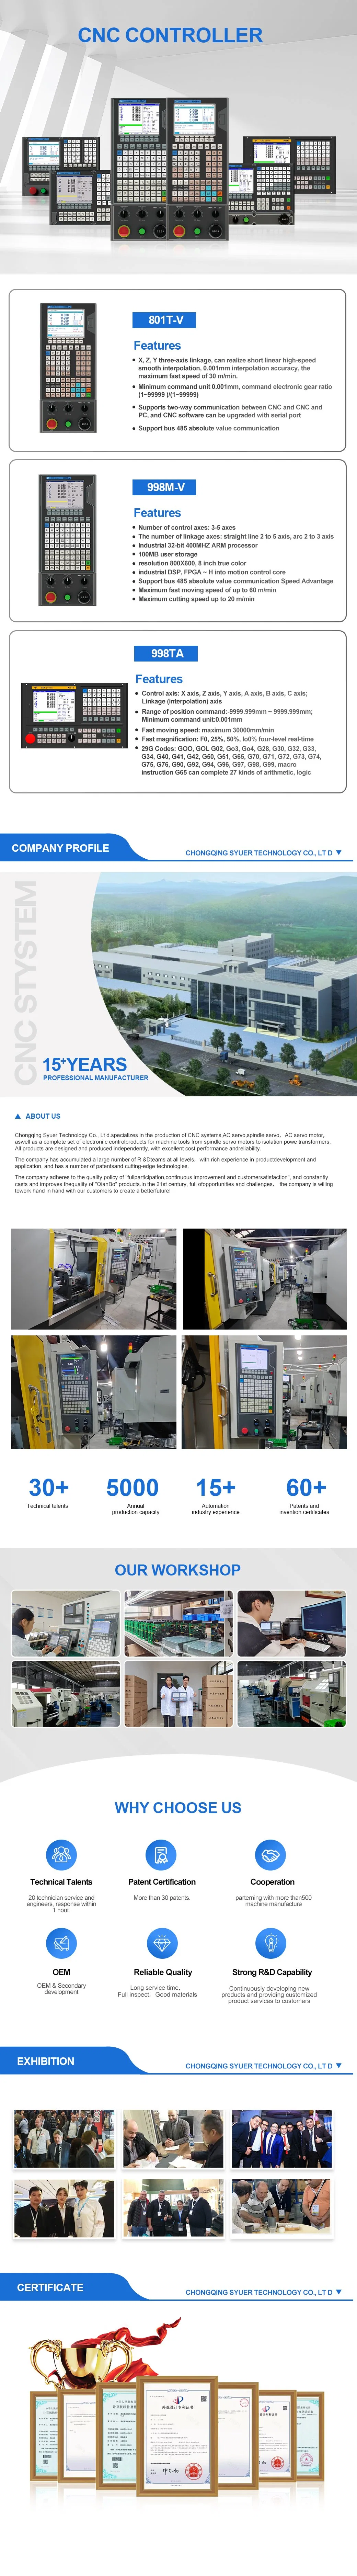 China Factory High Quality 3 Phase AC 380V 220/250kw Frequency Inverter Converter Motor Drive Open Loop Vector Milling Drilling Machine CNC Lathe